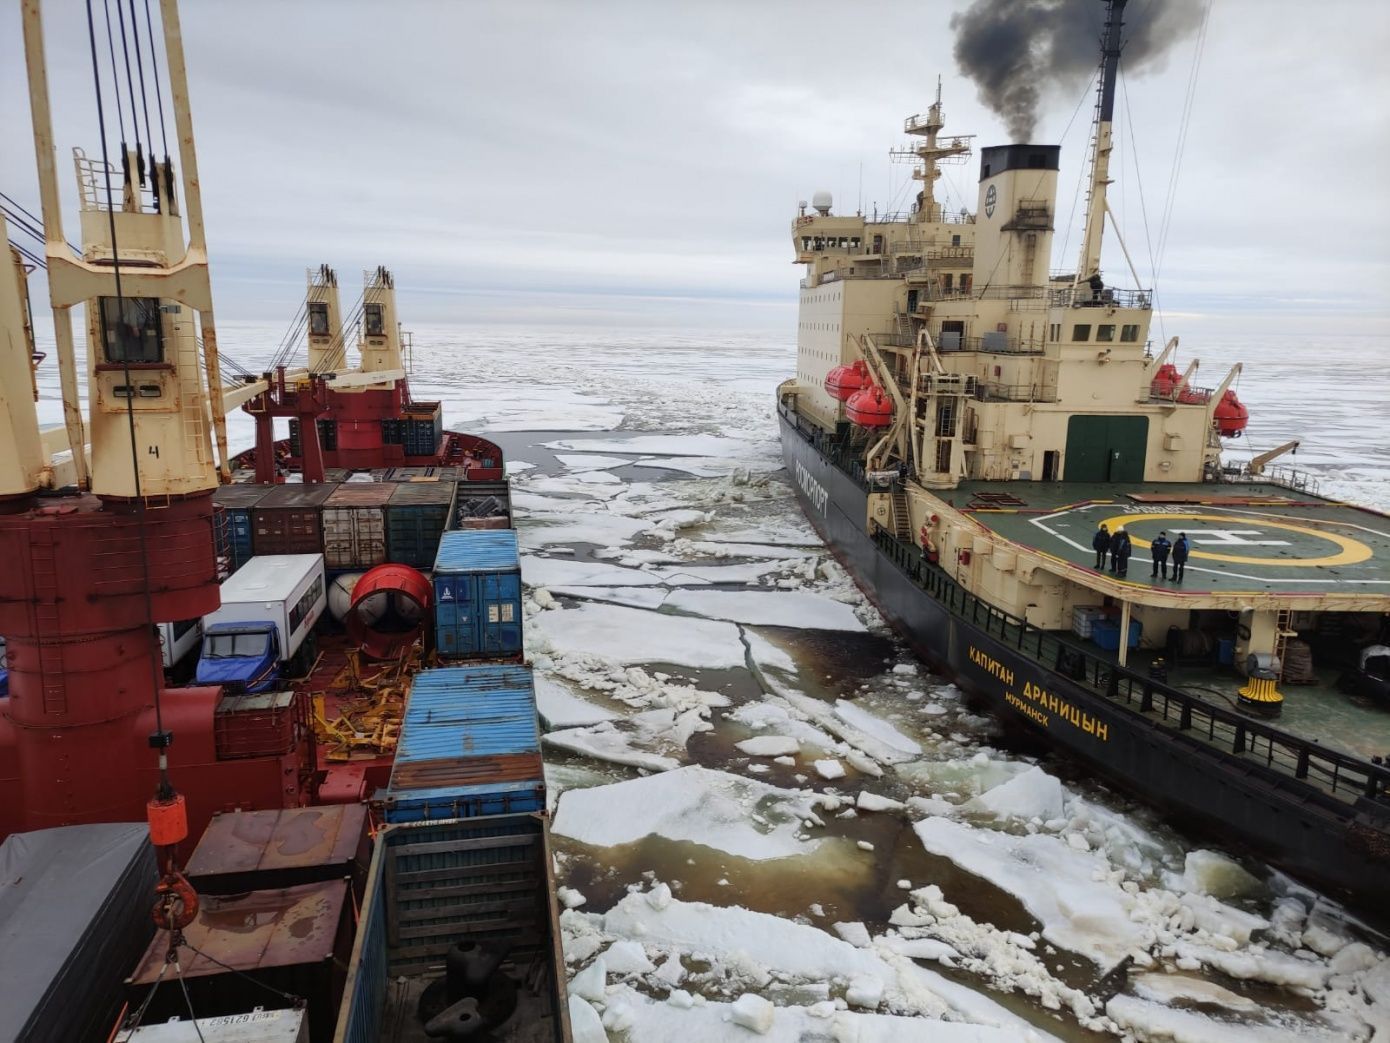 Nearly RUB 1.8 trillion to be spent on developing the Northern Sea Route by 2035